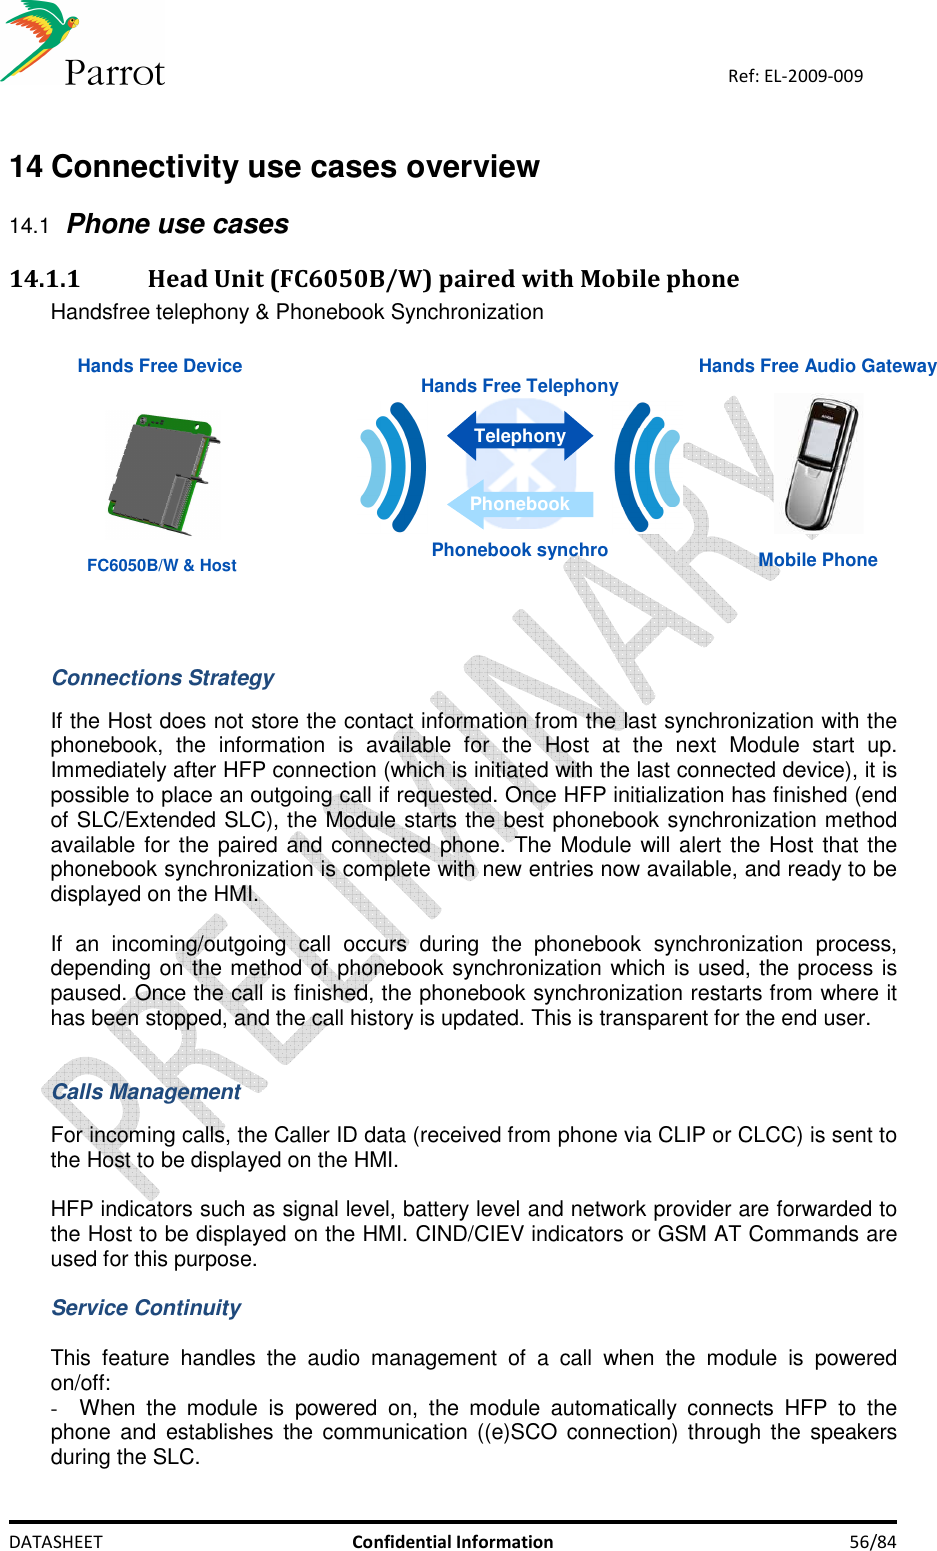    DATASHEET  Confidential Information  56/84 Ref: EL-2009-009  14 Connectivity use cases overview 14.1 Phone use cases 14.1.1 Head Unit (FC6050B/W) paired with Mobile phone  Handsfree telephony &amp; Phonebook Synchronization   Hands Free Audio Gateway Hands Free DeviceMobile PhoneHands Free TelephonyTelephonyPhonebookPhonebook synchroFC6050B/W &amp; Host   Connections Strategy  If the Host does not store the contact information from the last synchronization with the phonebook,  the  information  is  available  for  the  Host  at  the  next  Module  start  up. Immediately after HFP connection (which is initiated with the last connected device), it is possible to place an outgoing call if requested. Once HFP initialization has finished (end of SLC/Extended SLC), the Module starts the best phonebook synchronization method available for the paired and connected phone. The Module will alert the Host that the phonebook synchronization is complete with new entries now available, and ready to be displayed on the HMI.  If  an  incoming/outgoing  call  occurs  during  the  phonebook  synchronization  process, depending on the method of phonebook synchronization which is used, the process is paused. Once the call is finished, the phonebook synchronization restarts from where it has been stopped, and the call history is updated. This is transparent for the end user.   Calls Management  For incoming calls, the Caller ID data (received from phone via CLIP or CLCC) is sent to the Host to be displayed on the HMI.  HFP indicators such as signal level, battery level and network provider are forwarded to the Host to be displayed on the HMI. CIND/CIEV indicators or GSM AT Commands are used for this purpose.  Service Continuity  This  feature  handles  the  audio  management  of  a  call  when  the  module  is  powered on/off: -  When  the  module  is  powered  on,  the  module  automatically  connects  HFP  to  the phone and  establishes  the communication ((e)SCO connection) through the  speakers during the SLC. 